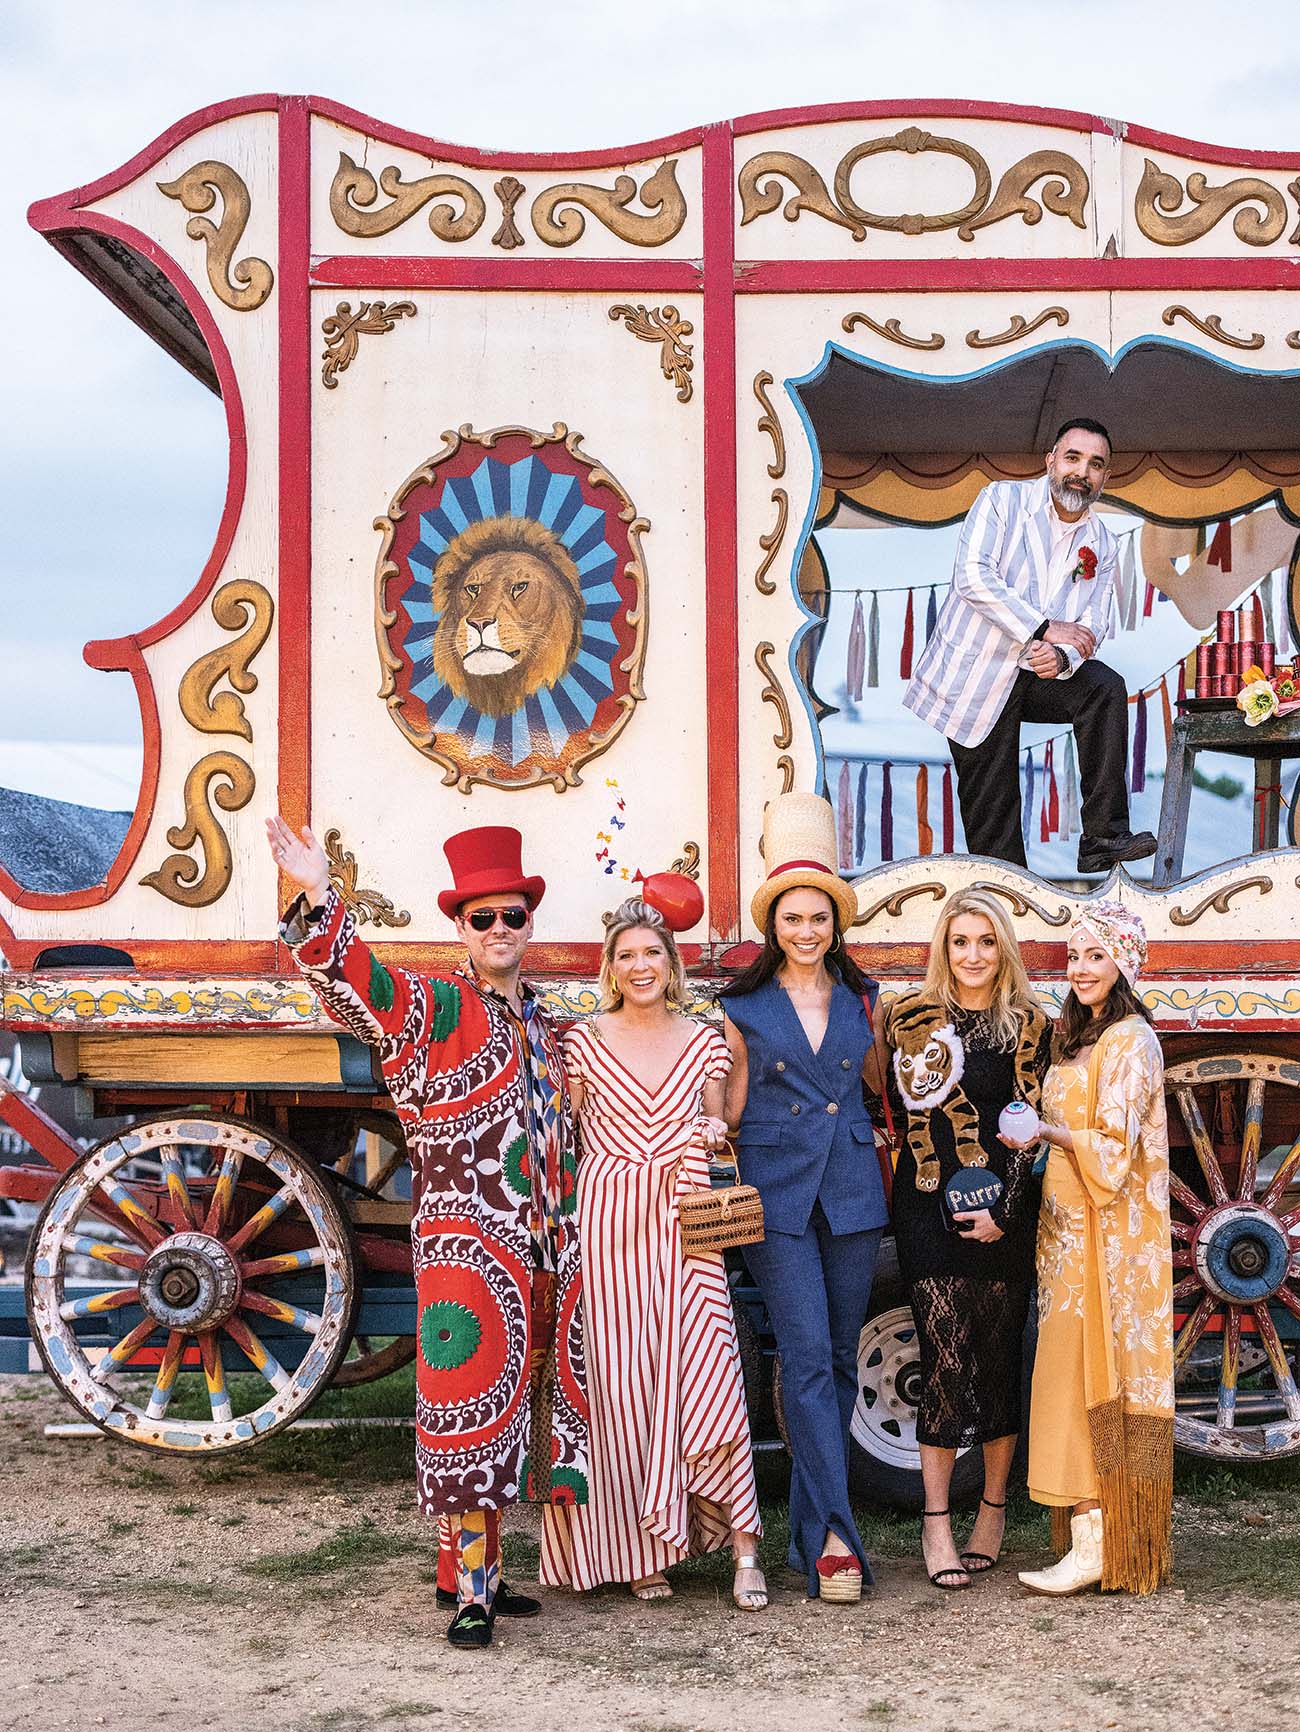 Gypsy dressed partygoers stand in front of a colorful caravan.